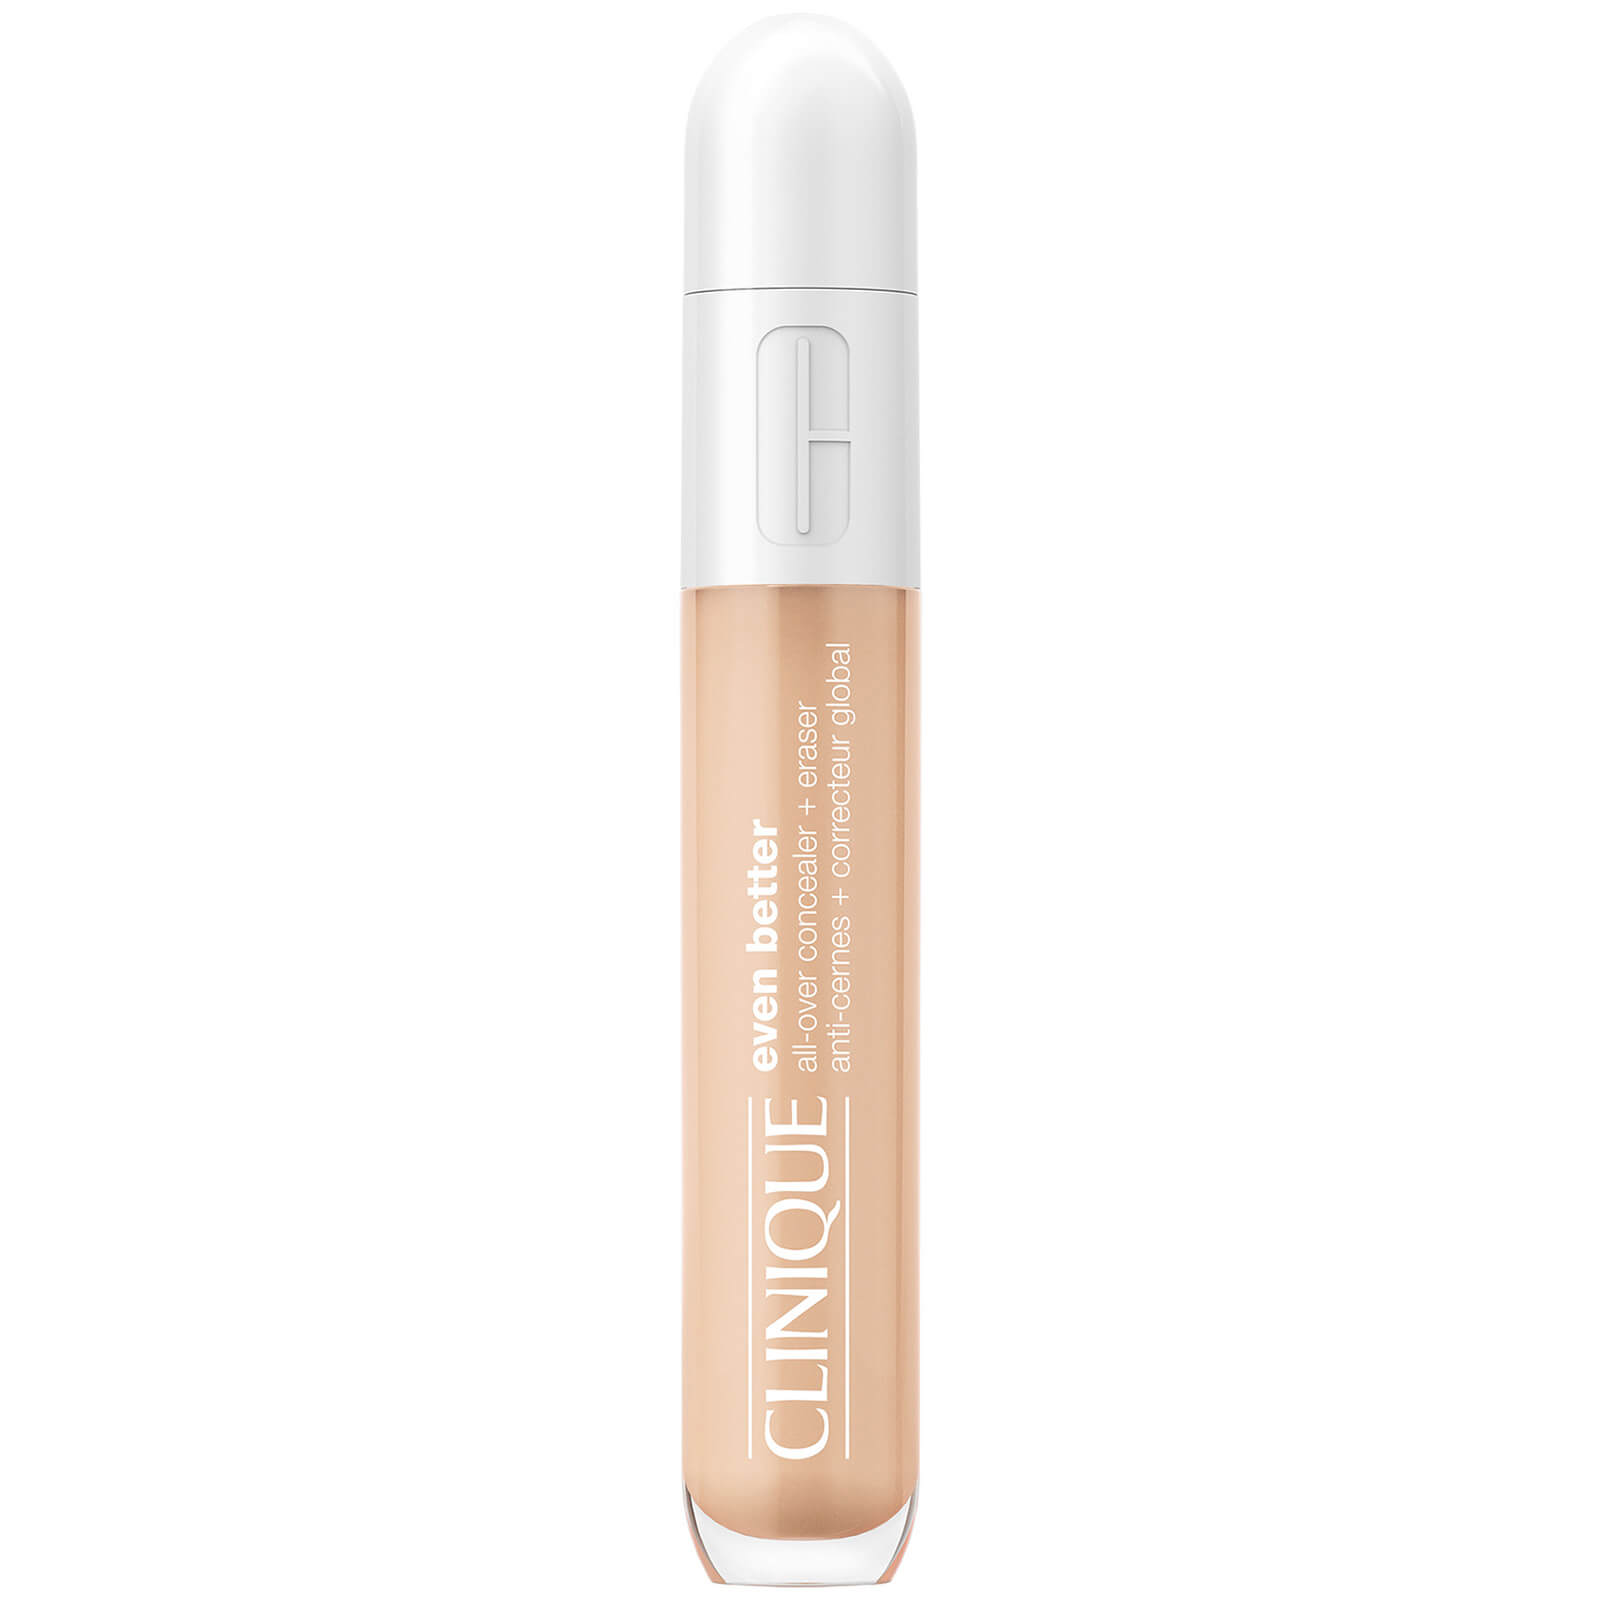 Image of Clinique Even Better All-Over Concealer and Eraser 6ml (Various Shades) - CN 28 Ivory